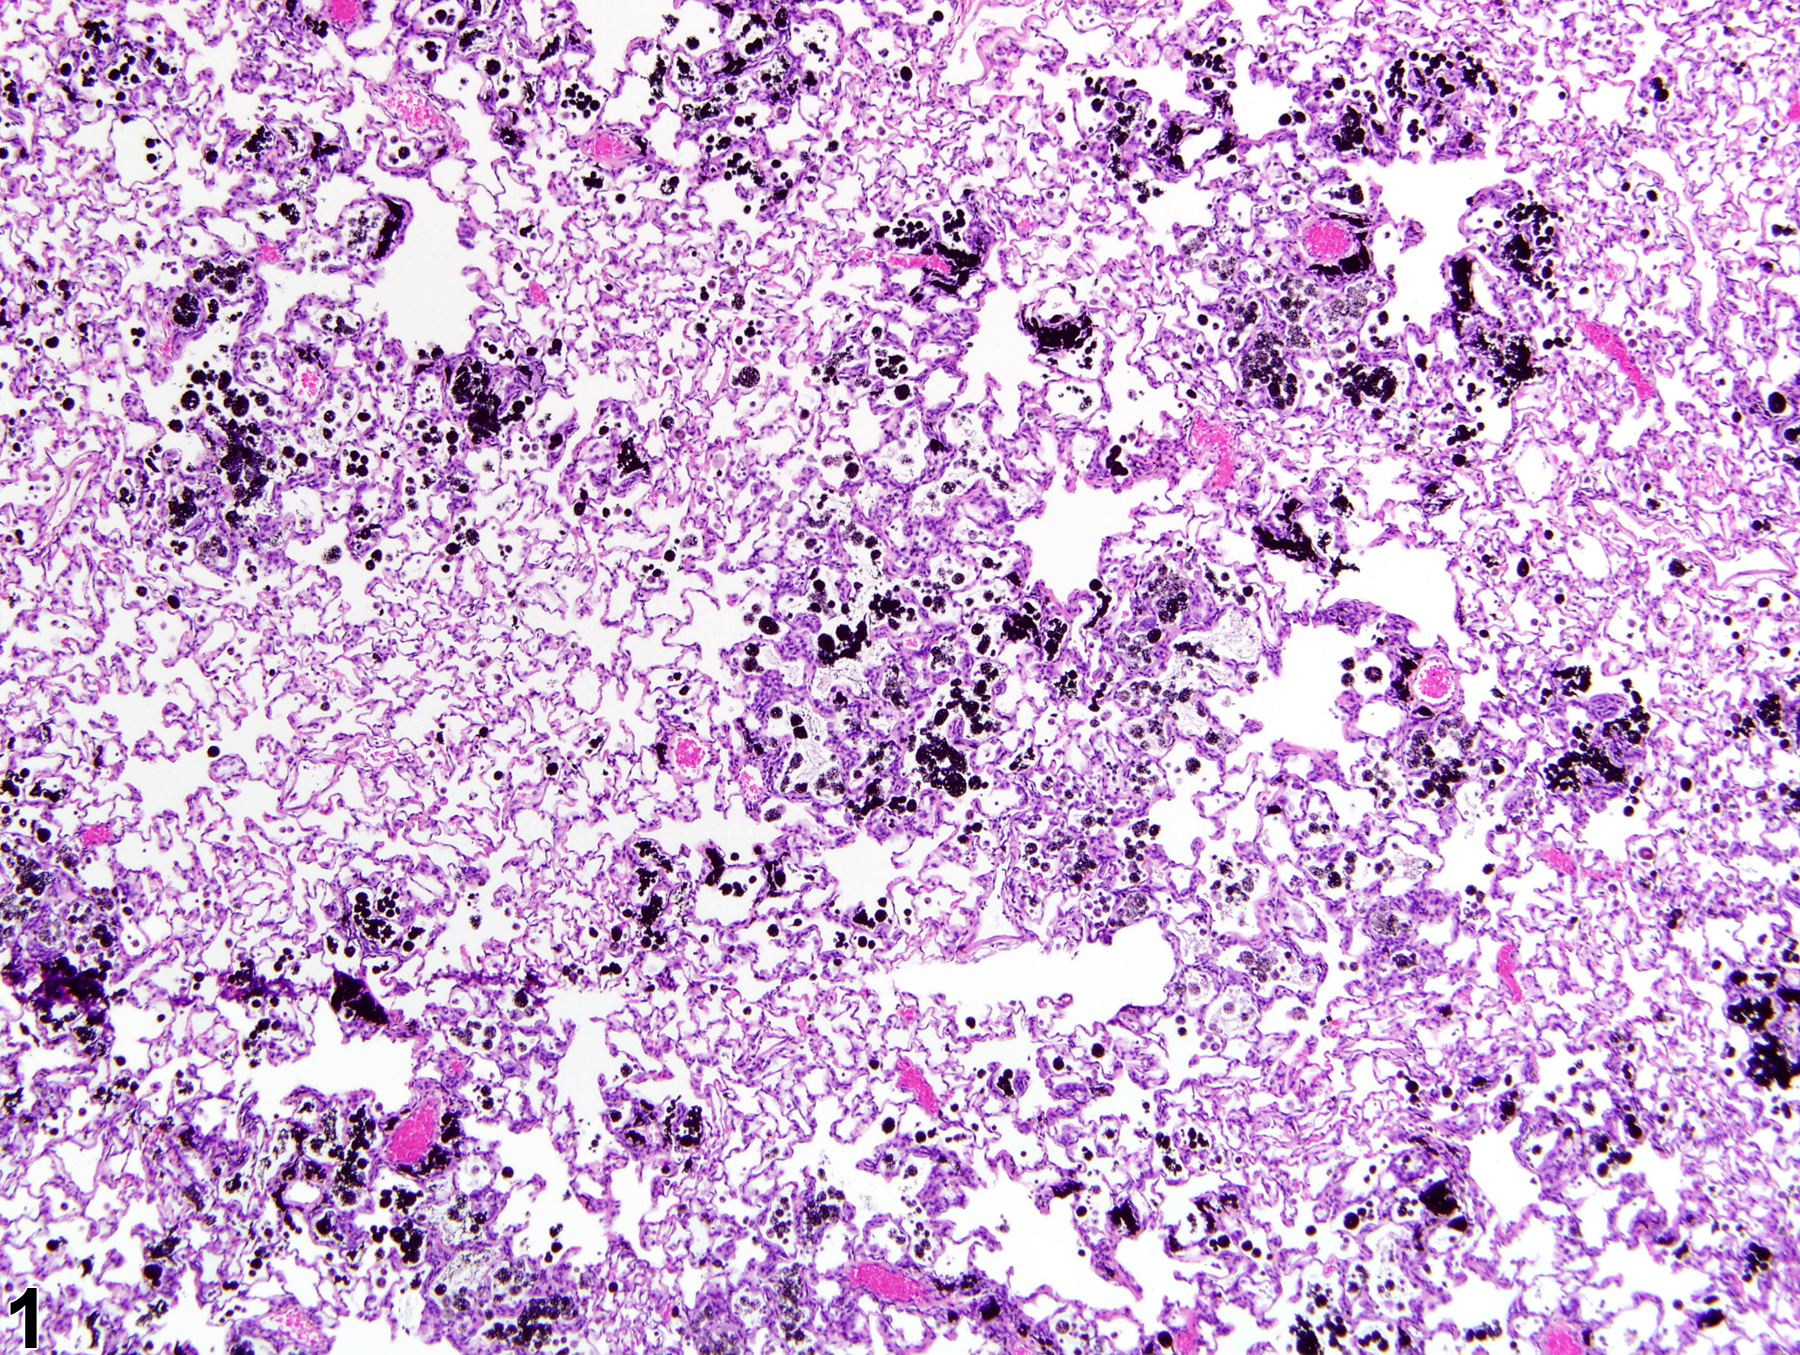 Image of foreign material in the lung from a male Harlan Sprague-Dawley rat in a chronic study